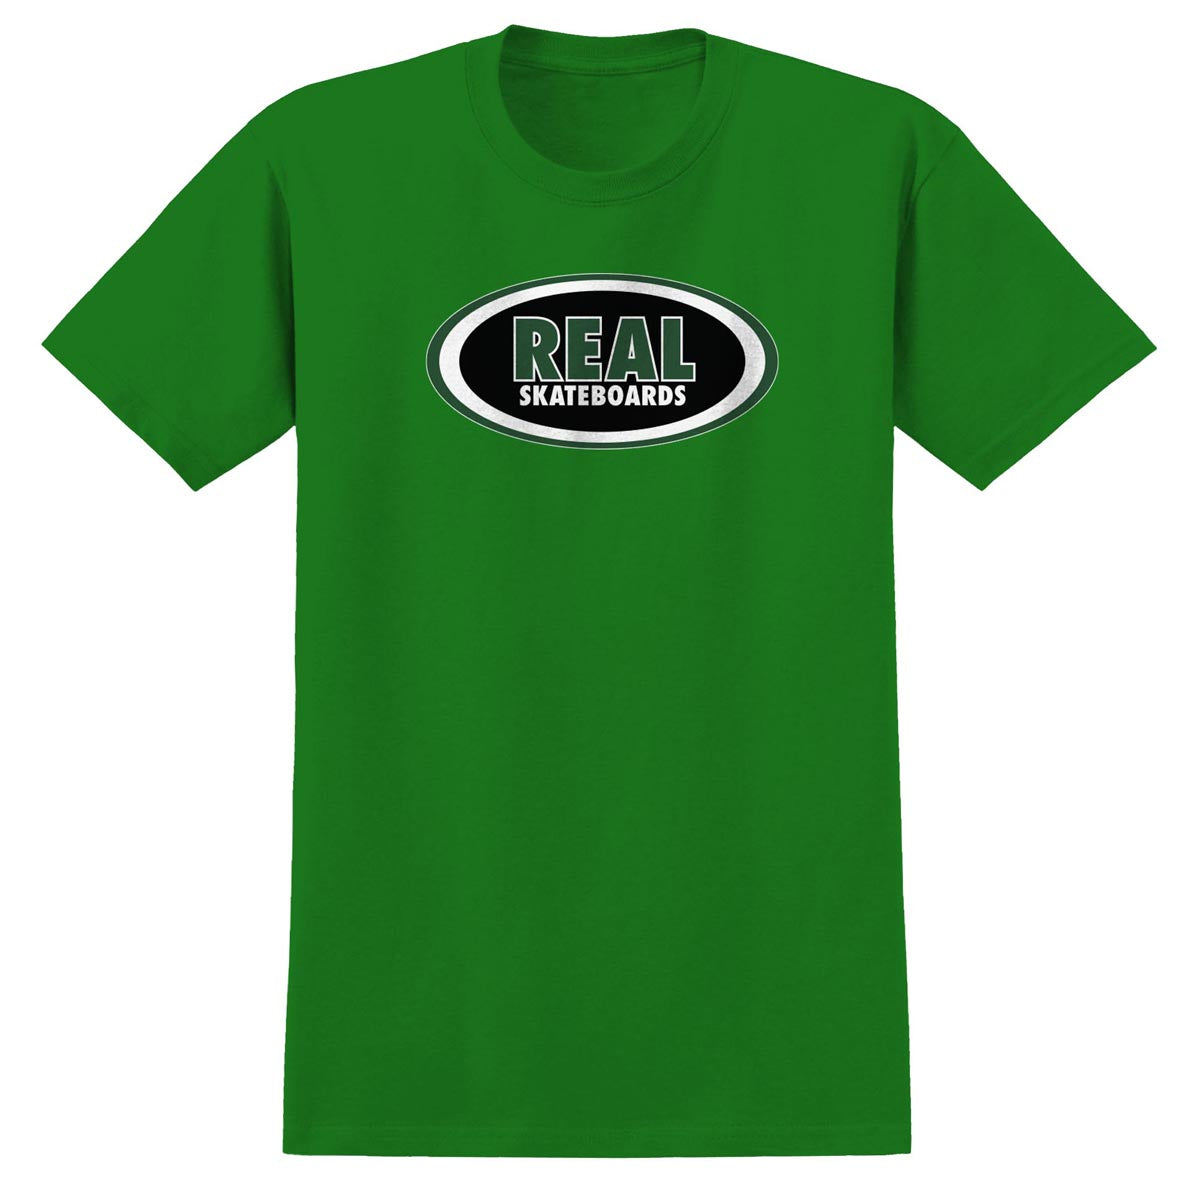 Real Oval T-Shirt - Kelly/Green/Black/White image 1